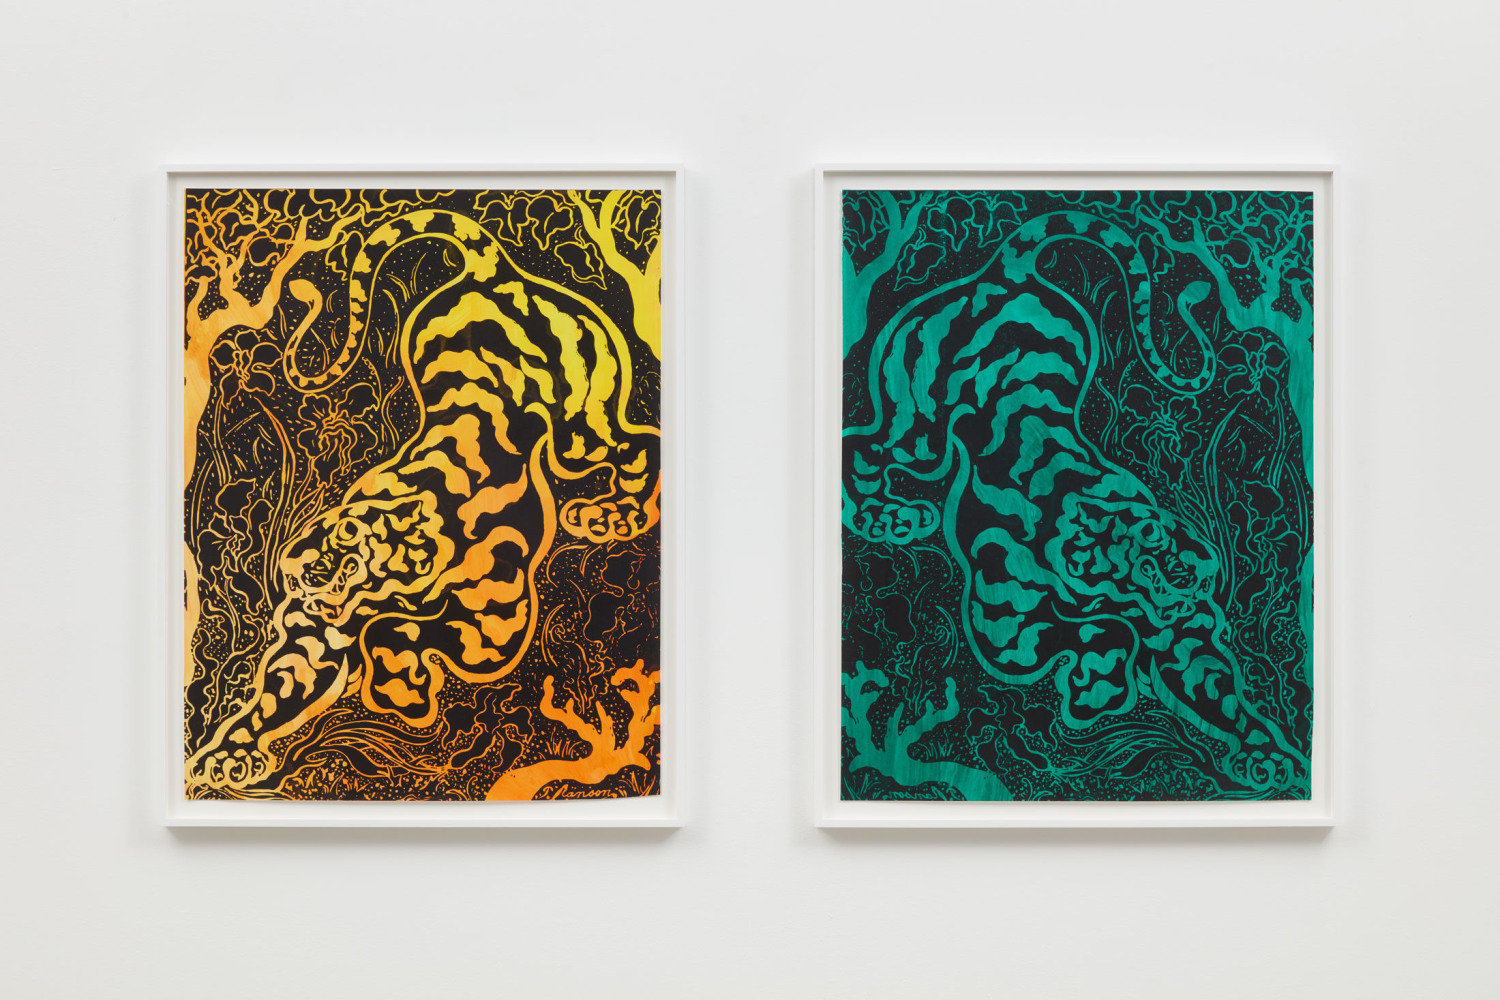 Sarah Crowner
Split Tiger (after PR), 2019
Paint and silkscreen on paper
Each: 39 x 30 inches (99.1 x 76.2 cm)